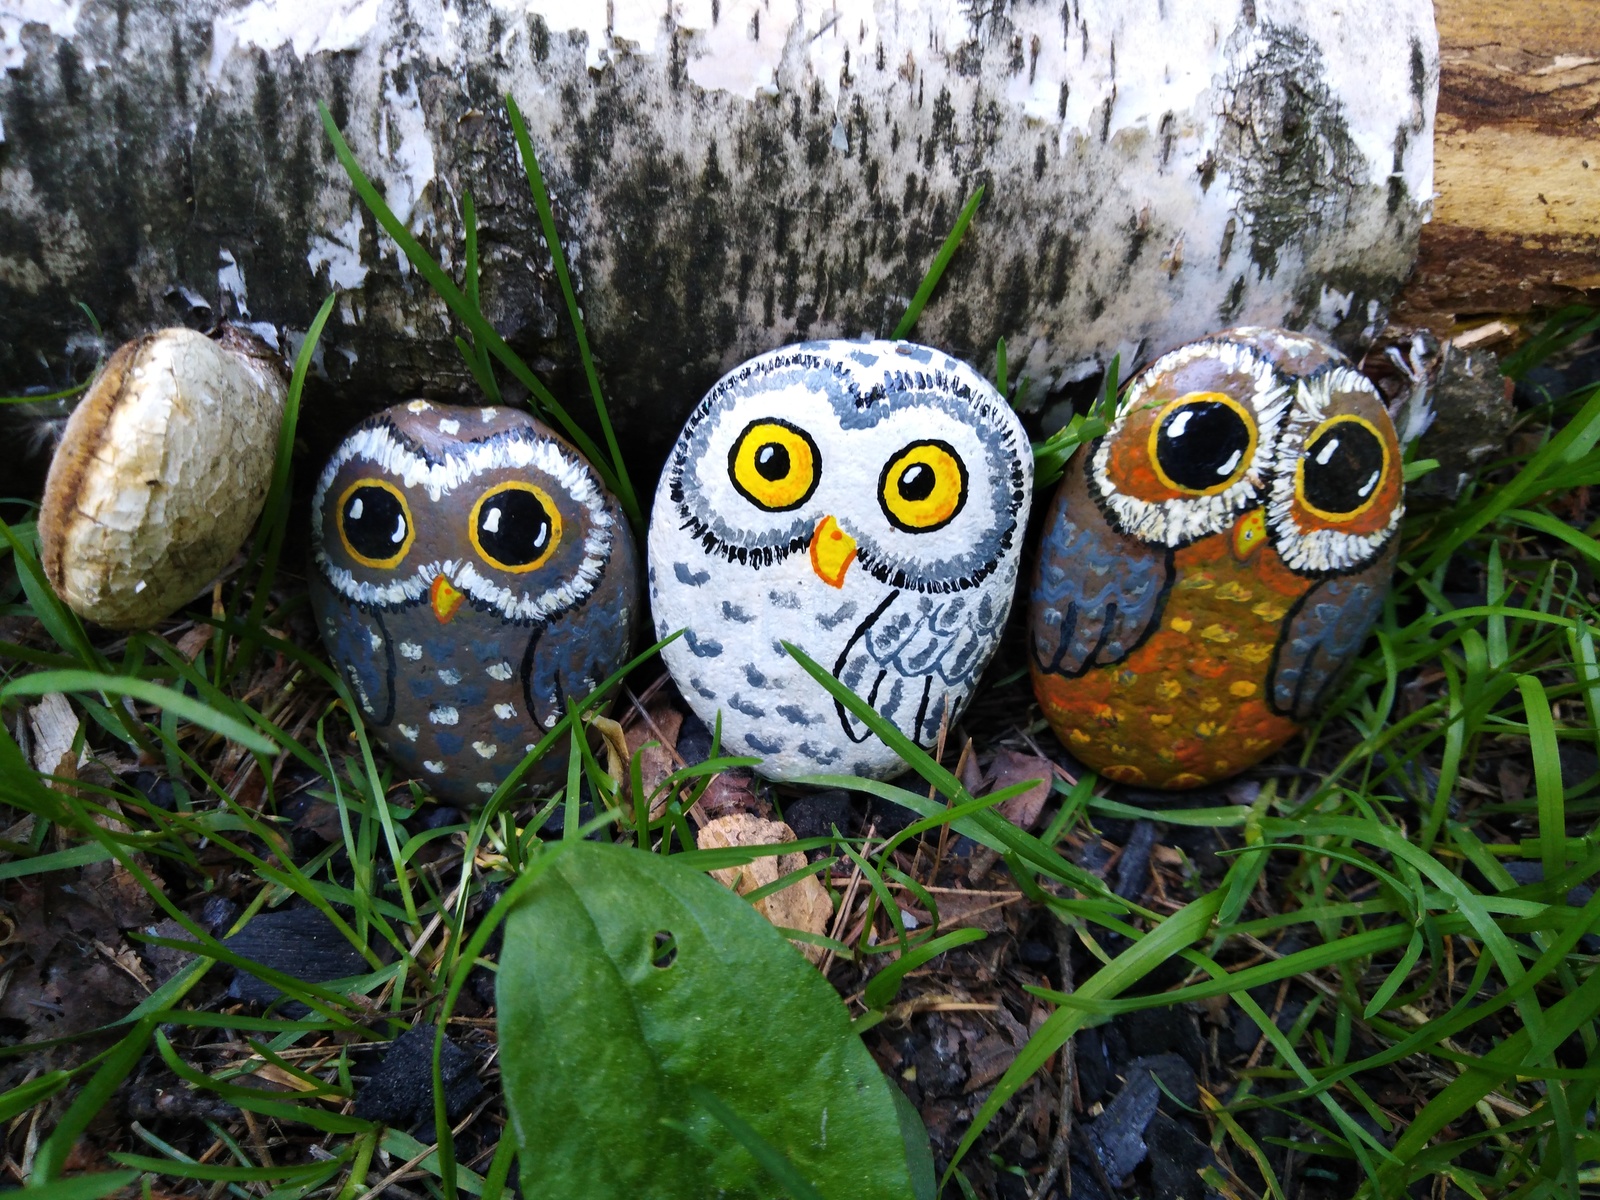 The Big Owl family is looking for a home! - My, Owl, Is free, Freebie, For free, Handmade, Creation